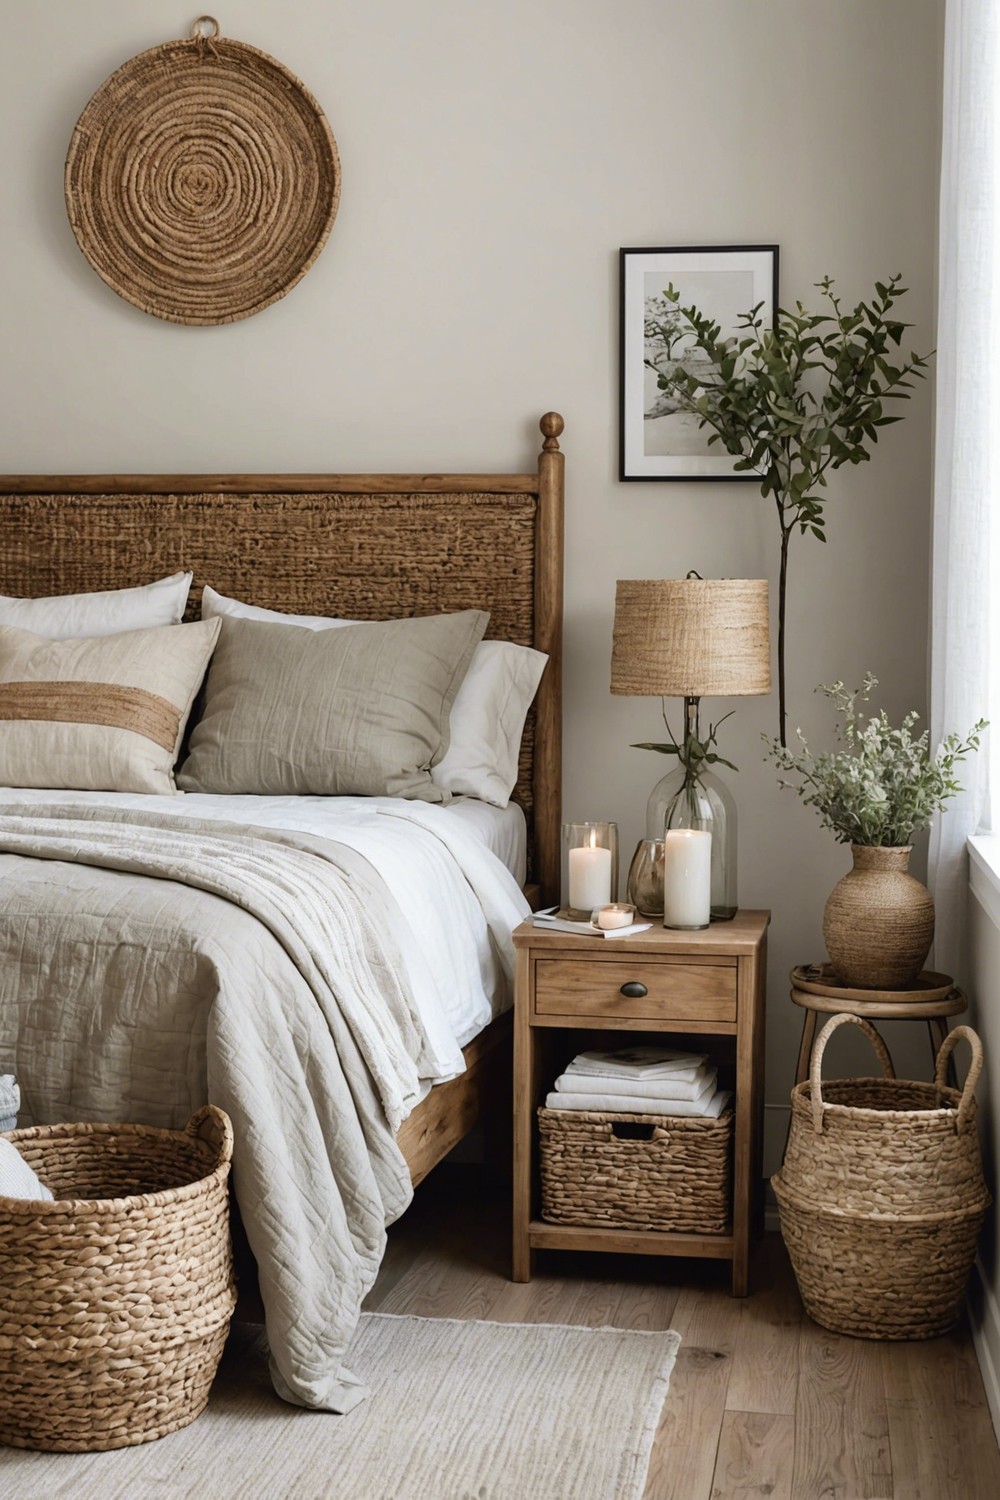 Incorporate Natural Elements like Woven Baskets